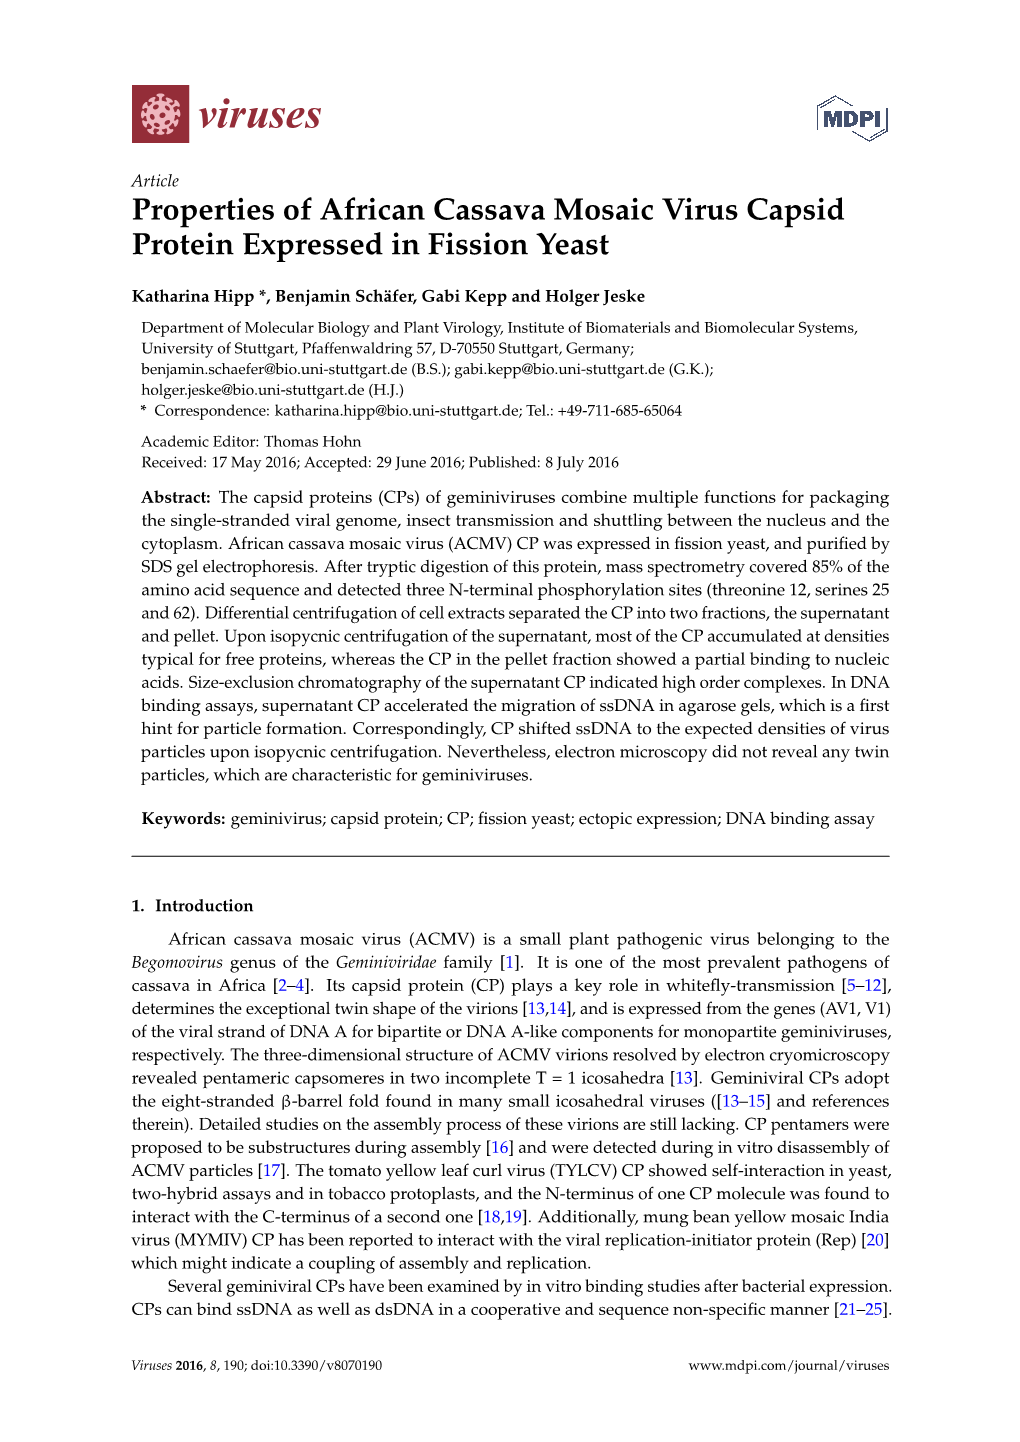 Properties of African Cassava Mosaic Virus Capsid Protein Expressed in Fission Yeast